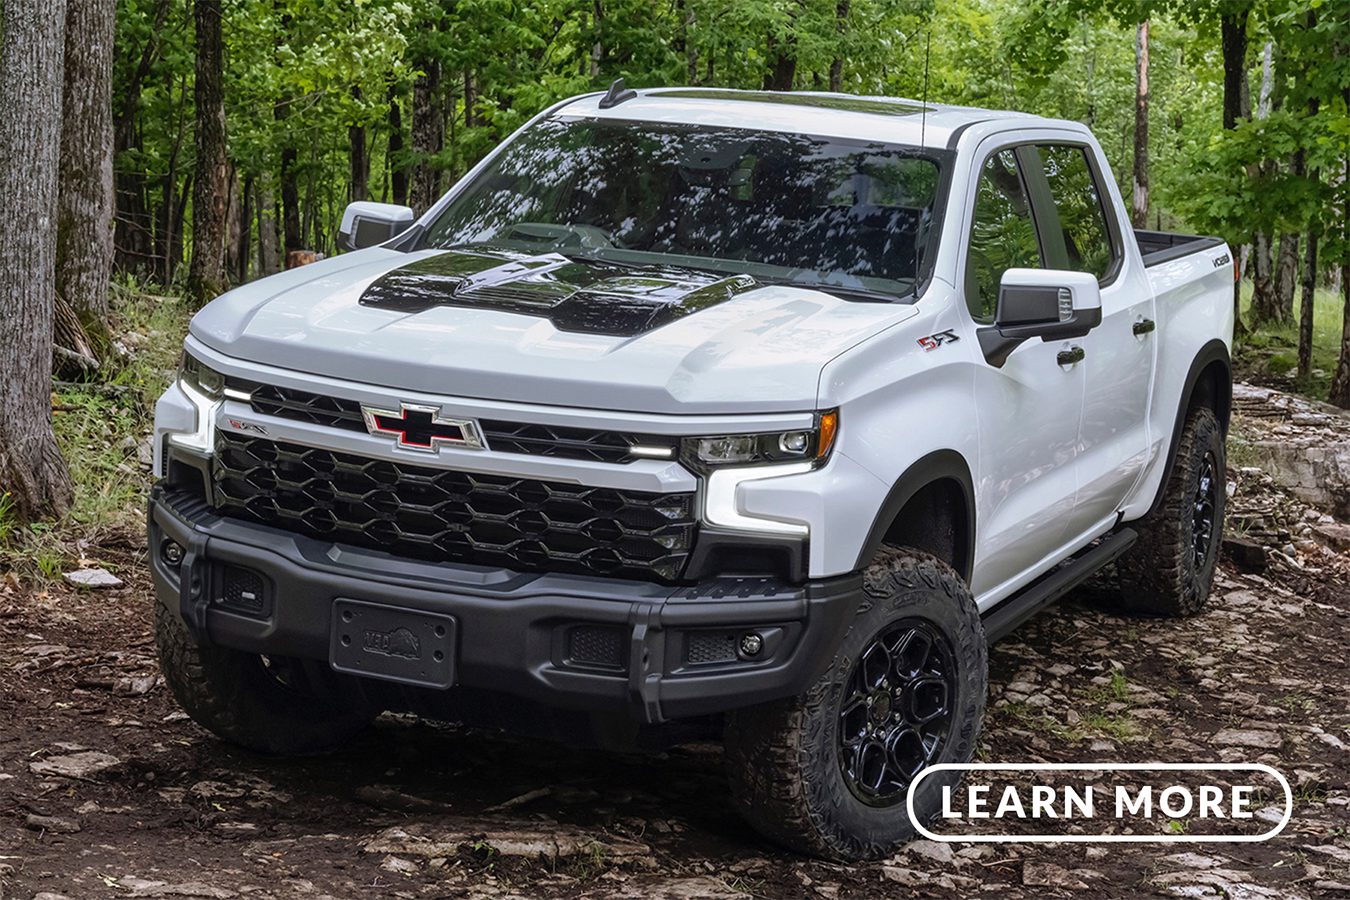 The 2019 chevrolet silverado is parked in the woods.